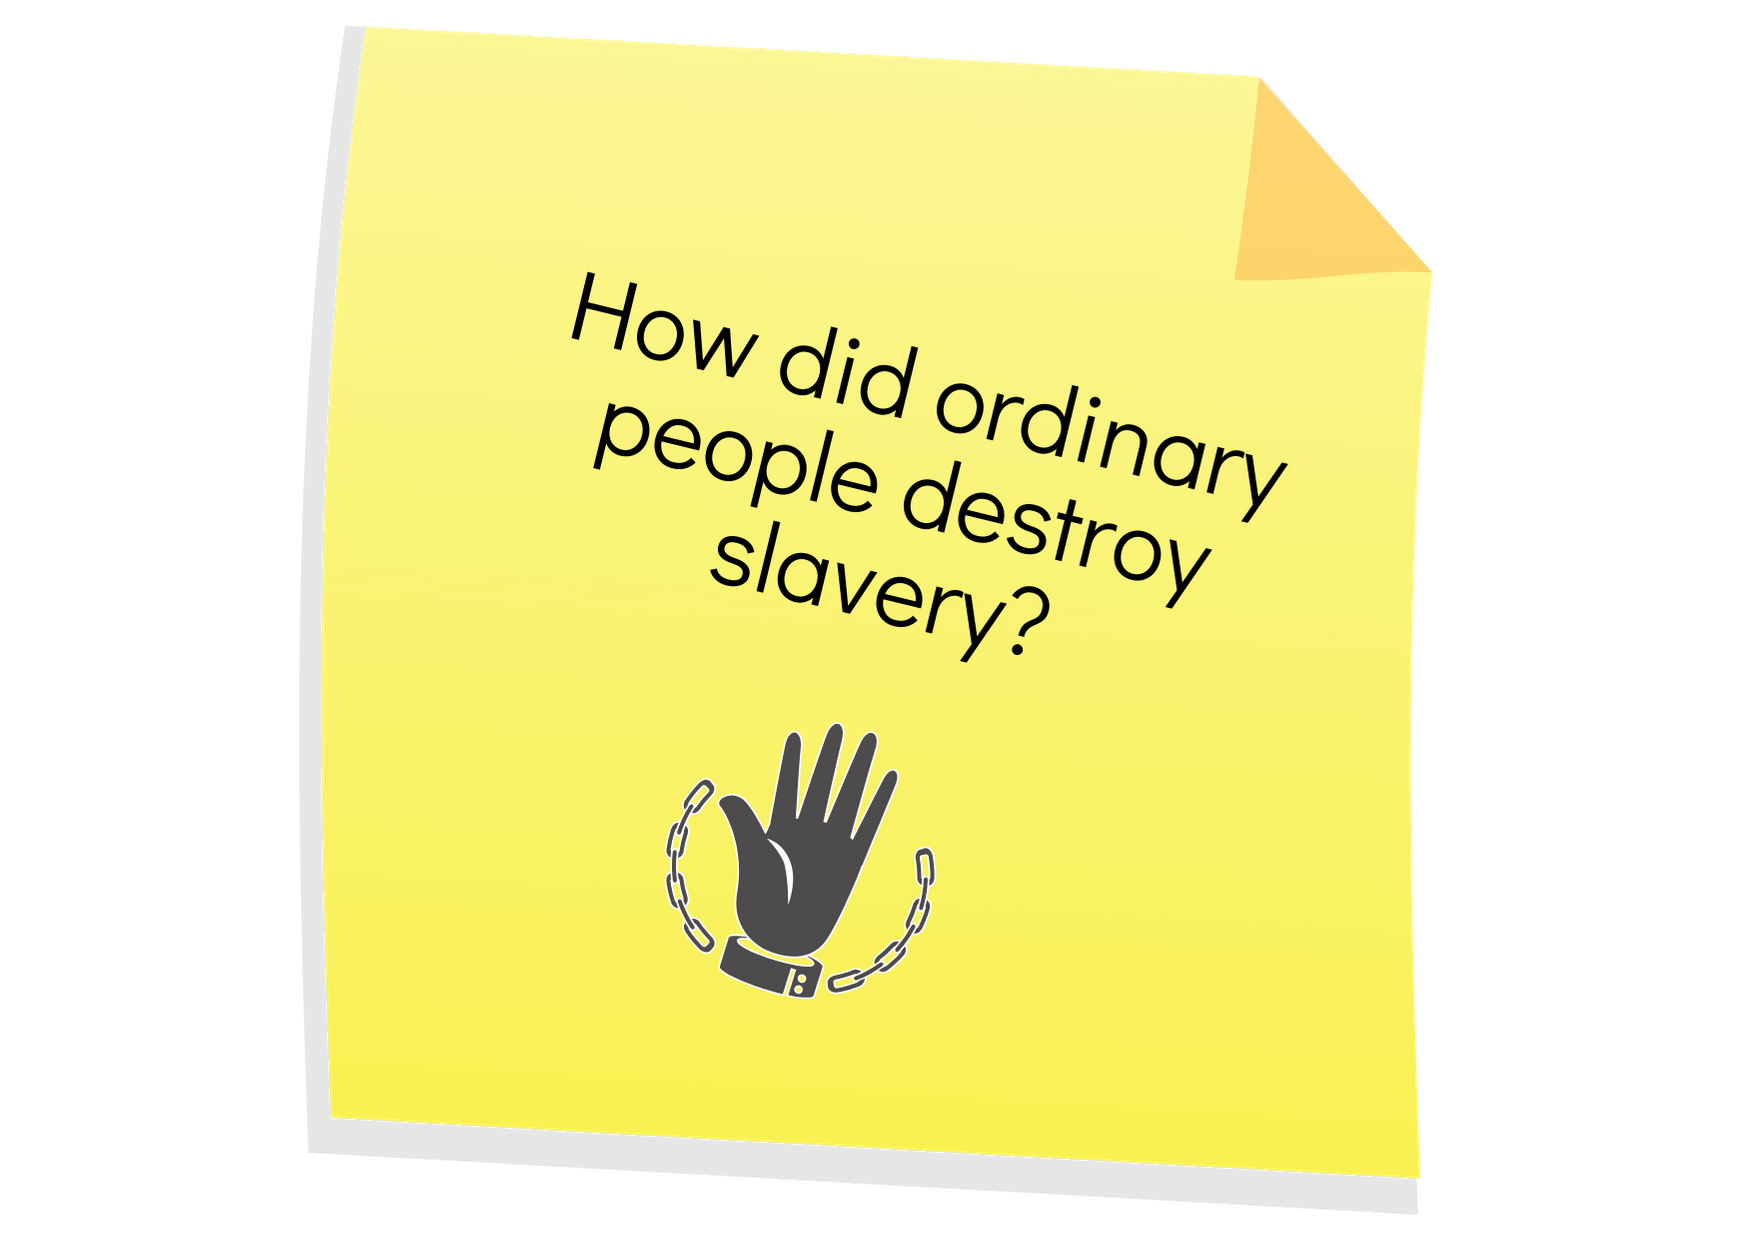 sketch of hand, words: how did ordinary people destroy slavery?